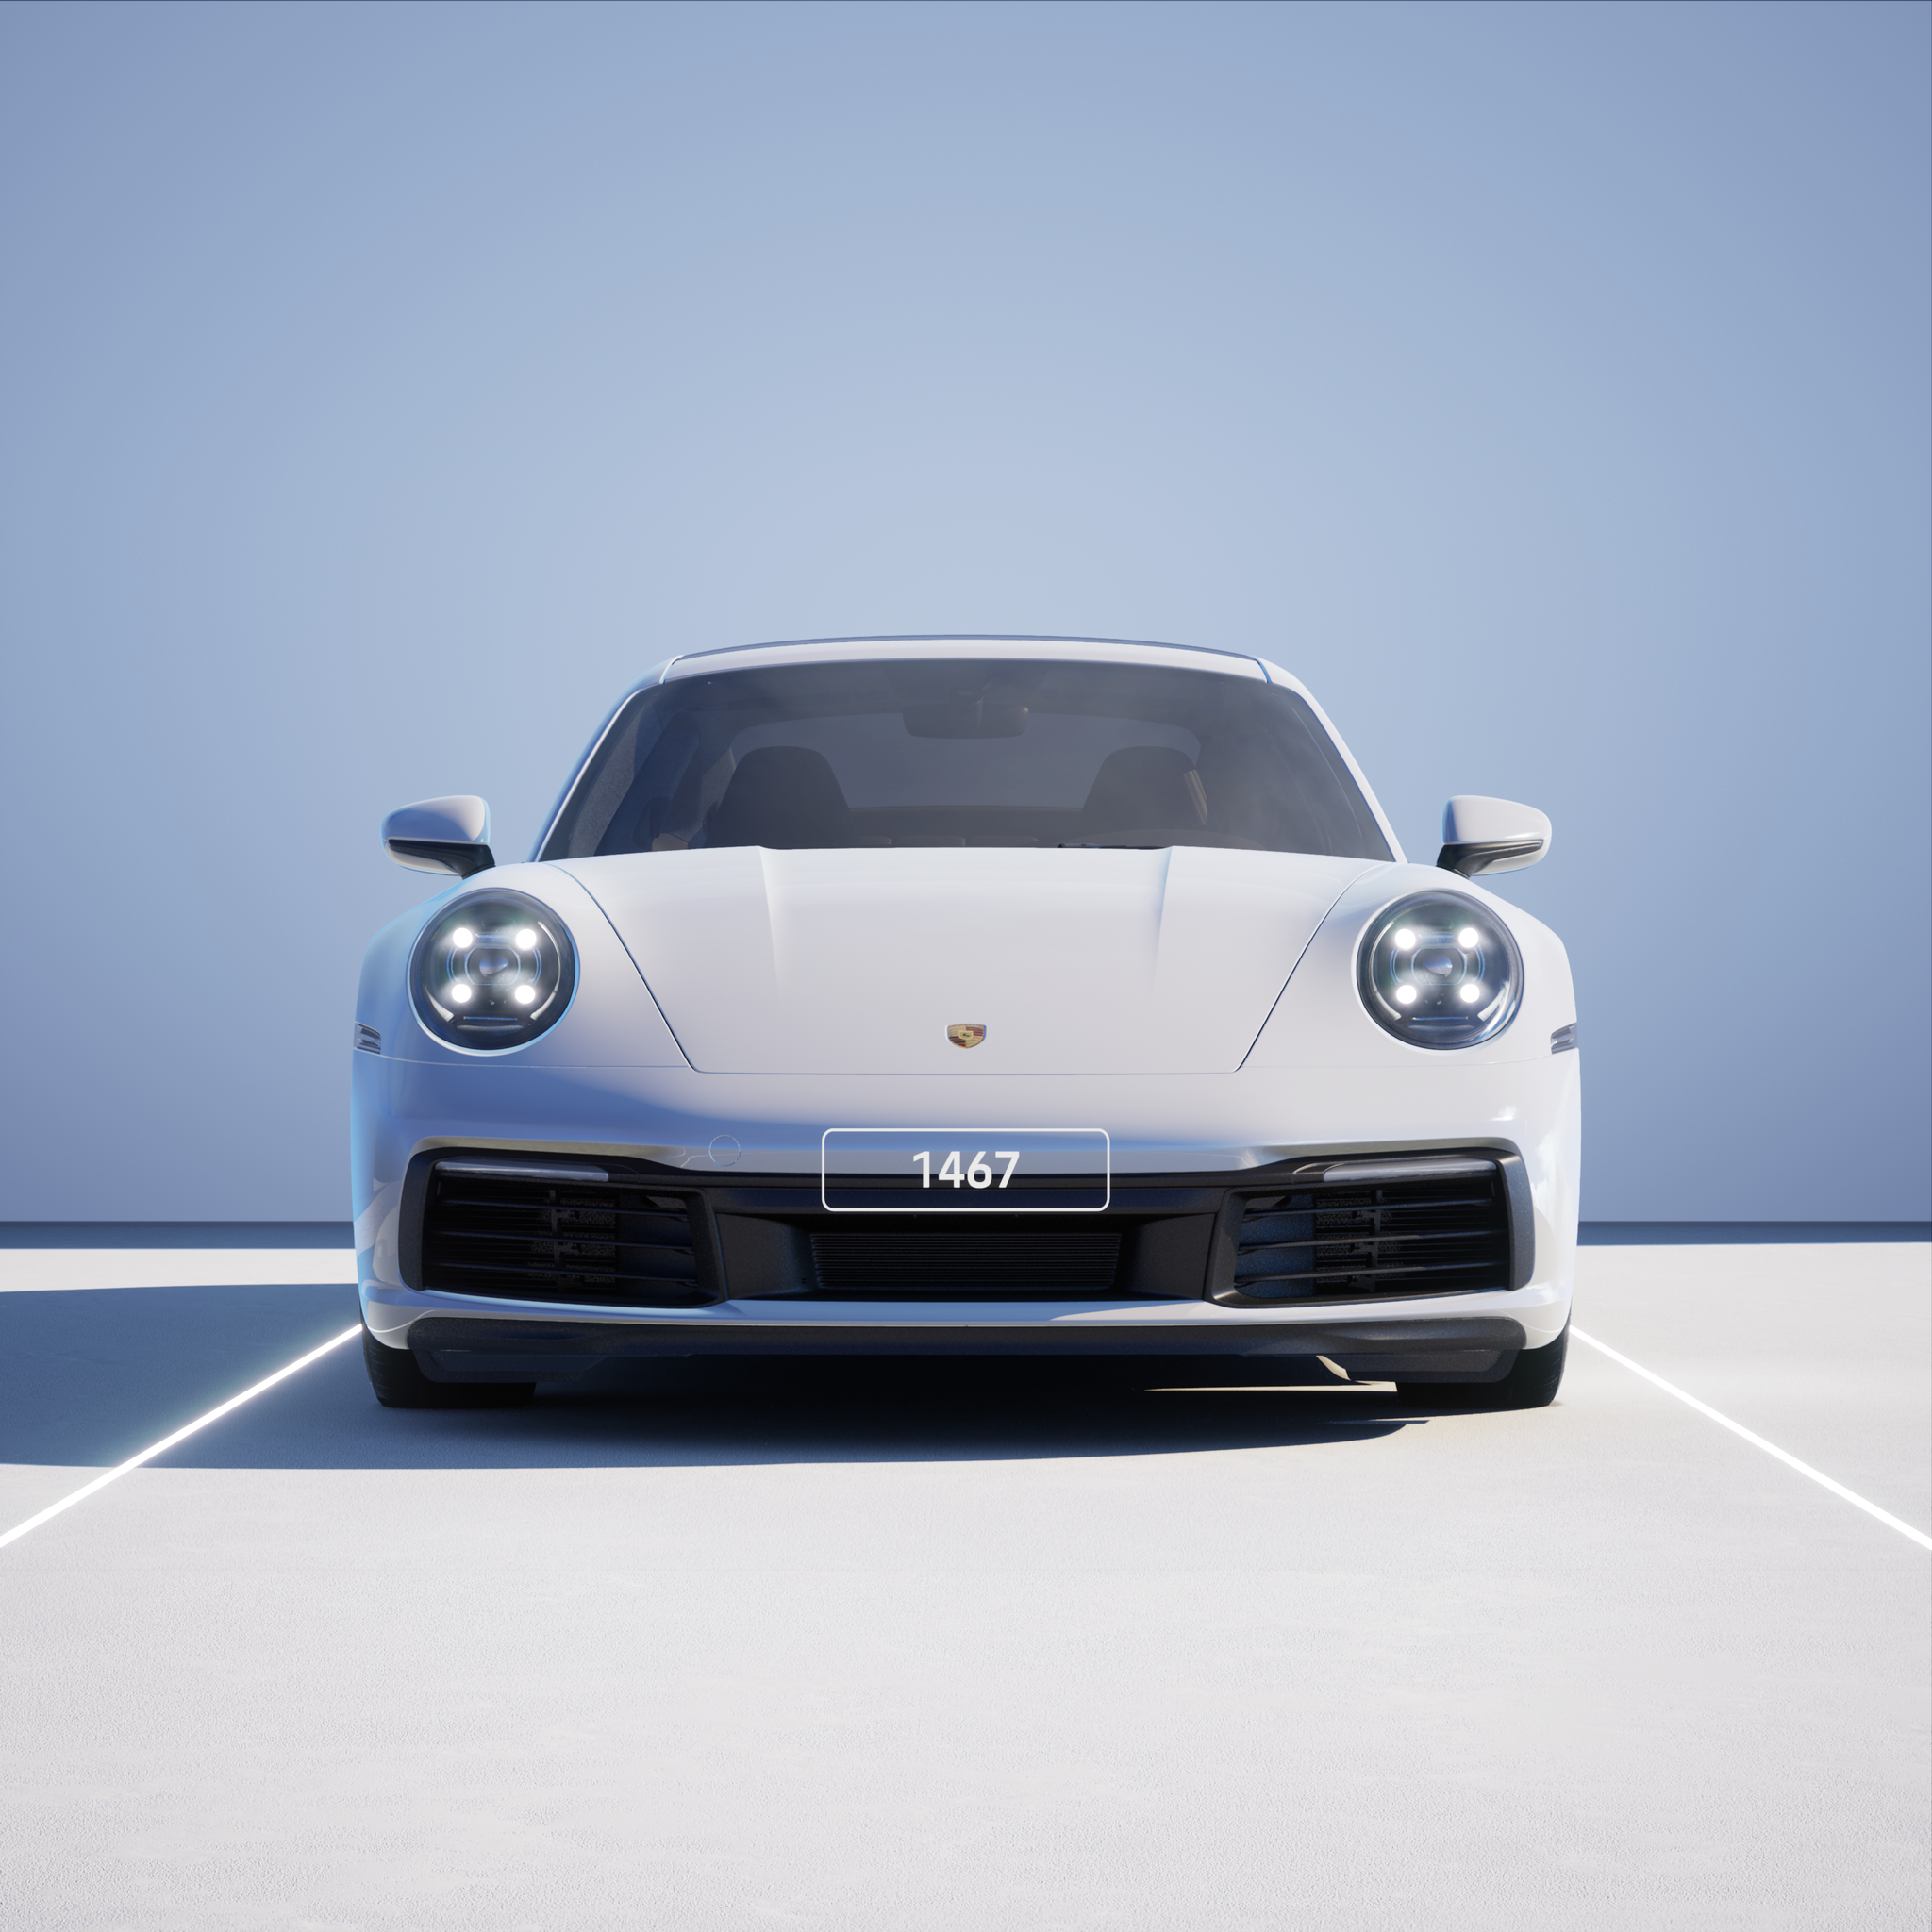 The PORSCHΞ 911 1467 image in phase